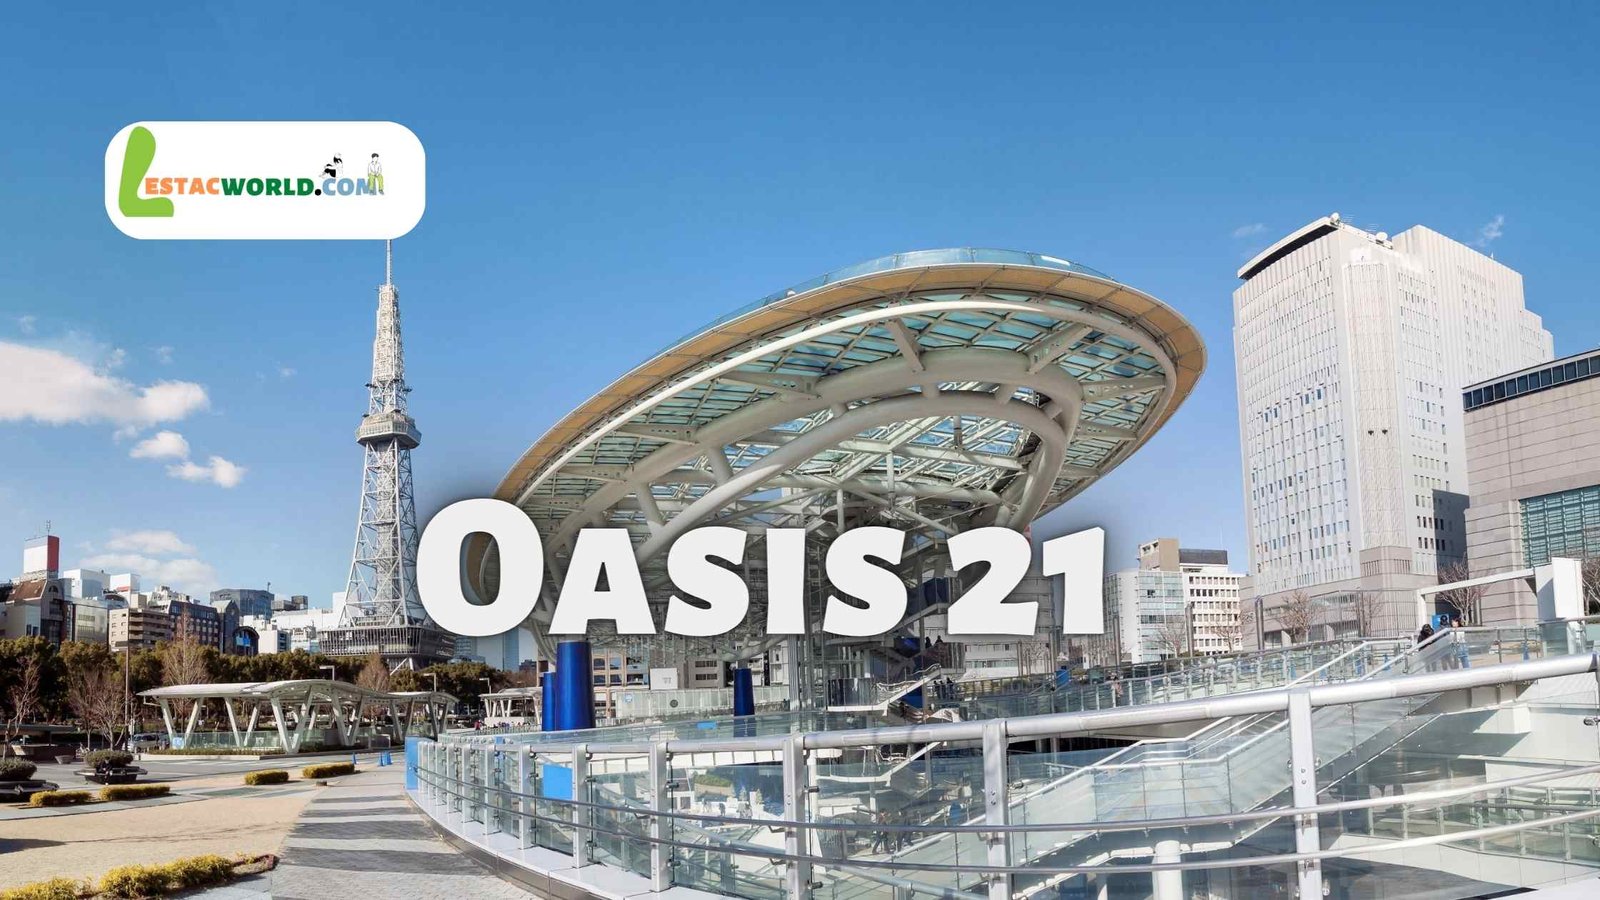 About Oasis 21